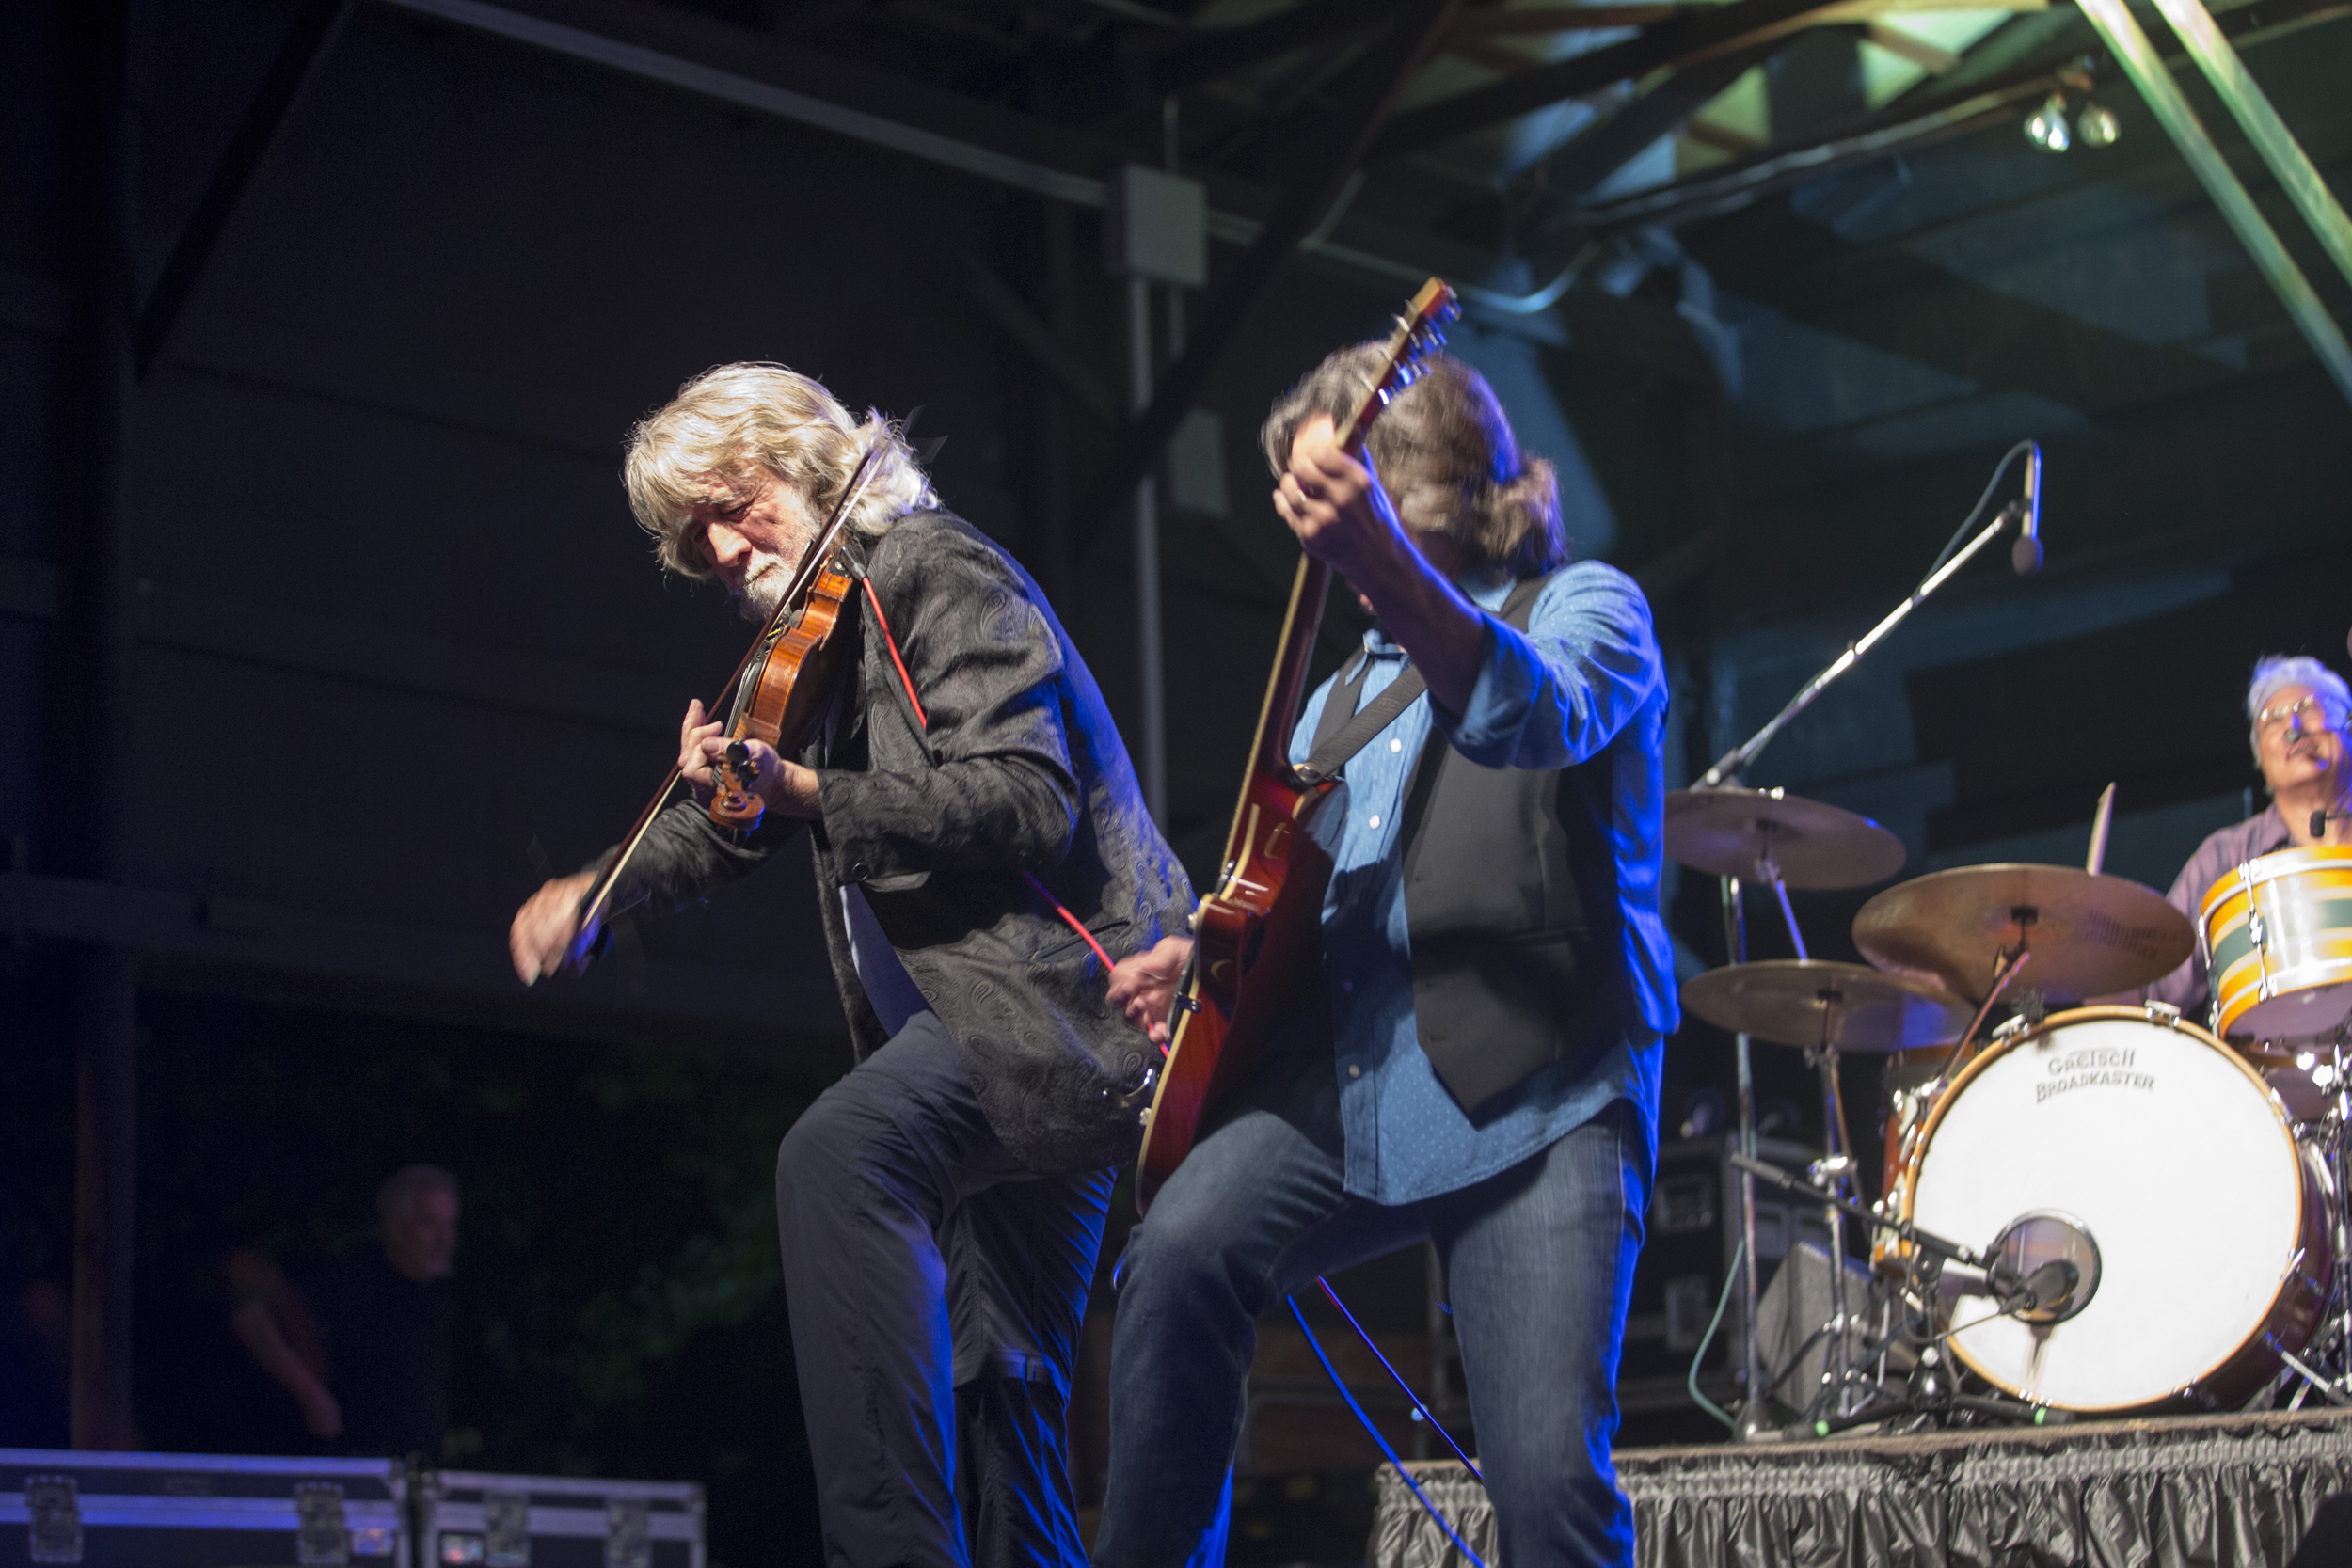 Nitty Gritty Dirt Band at Shenandoah Valley Music Festival